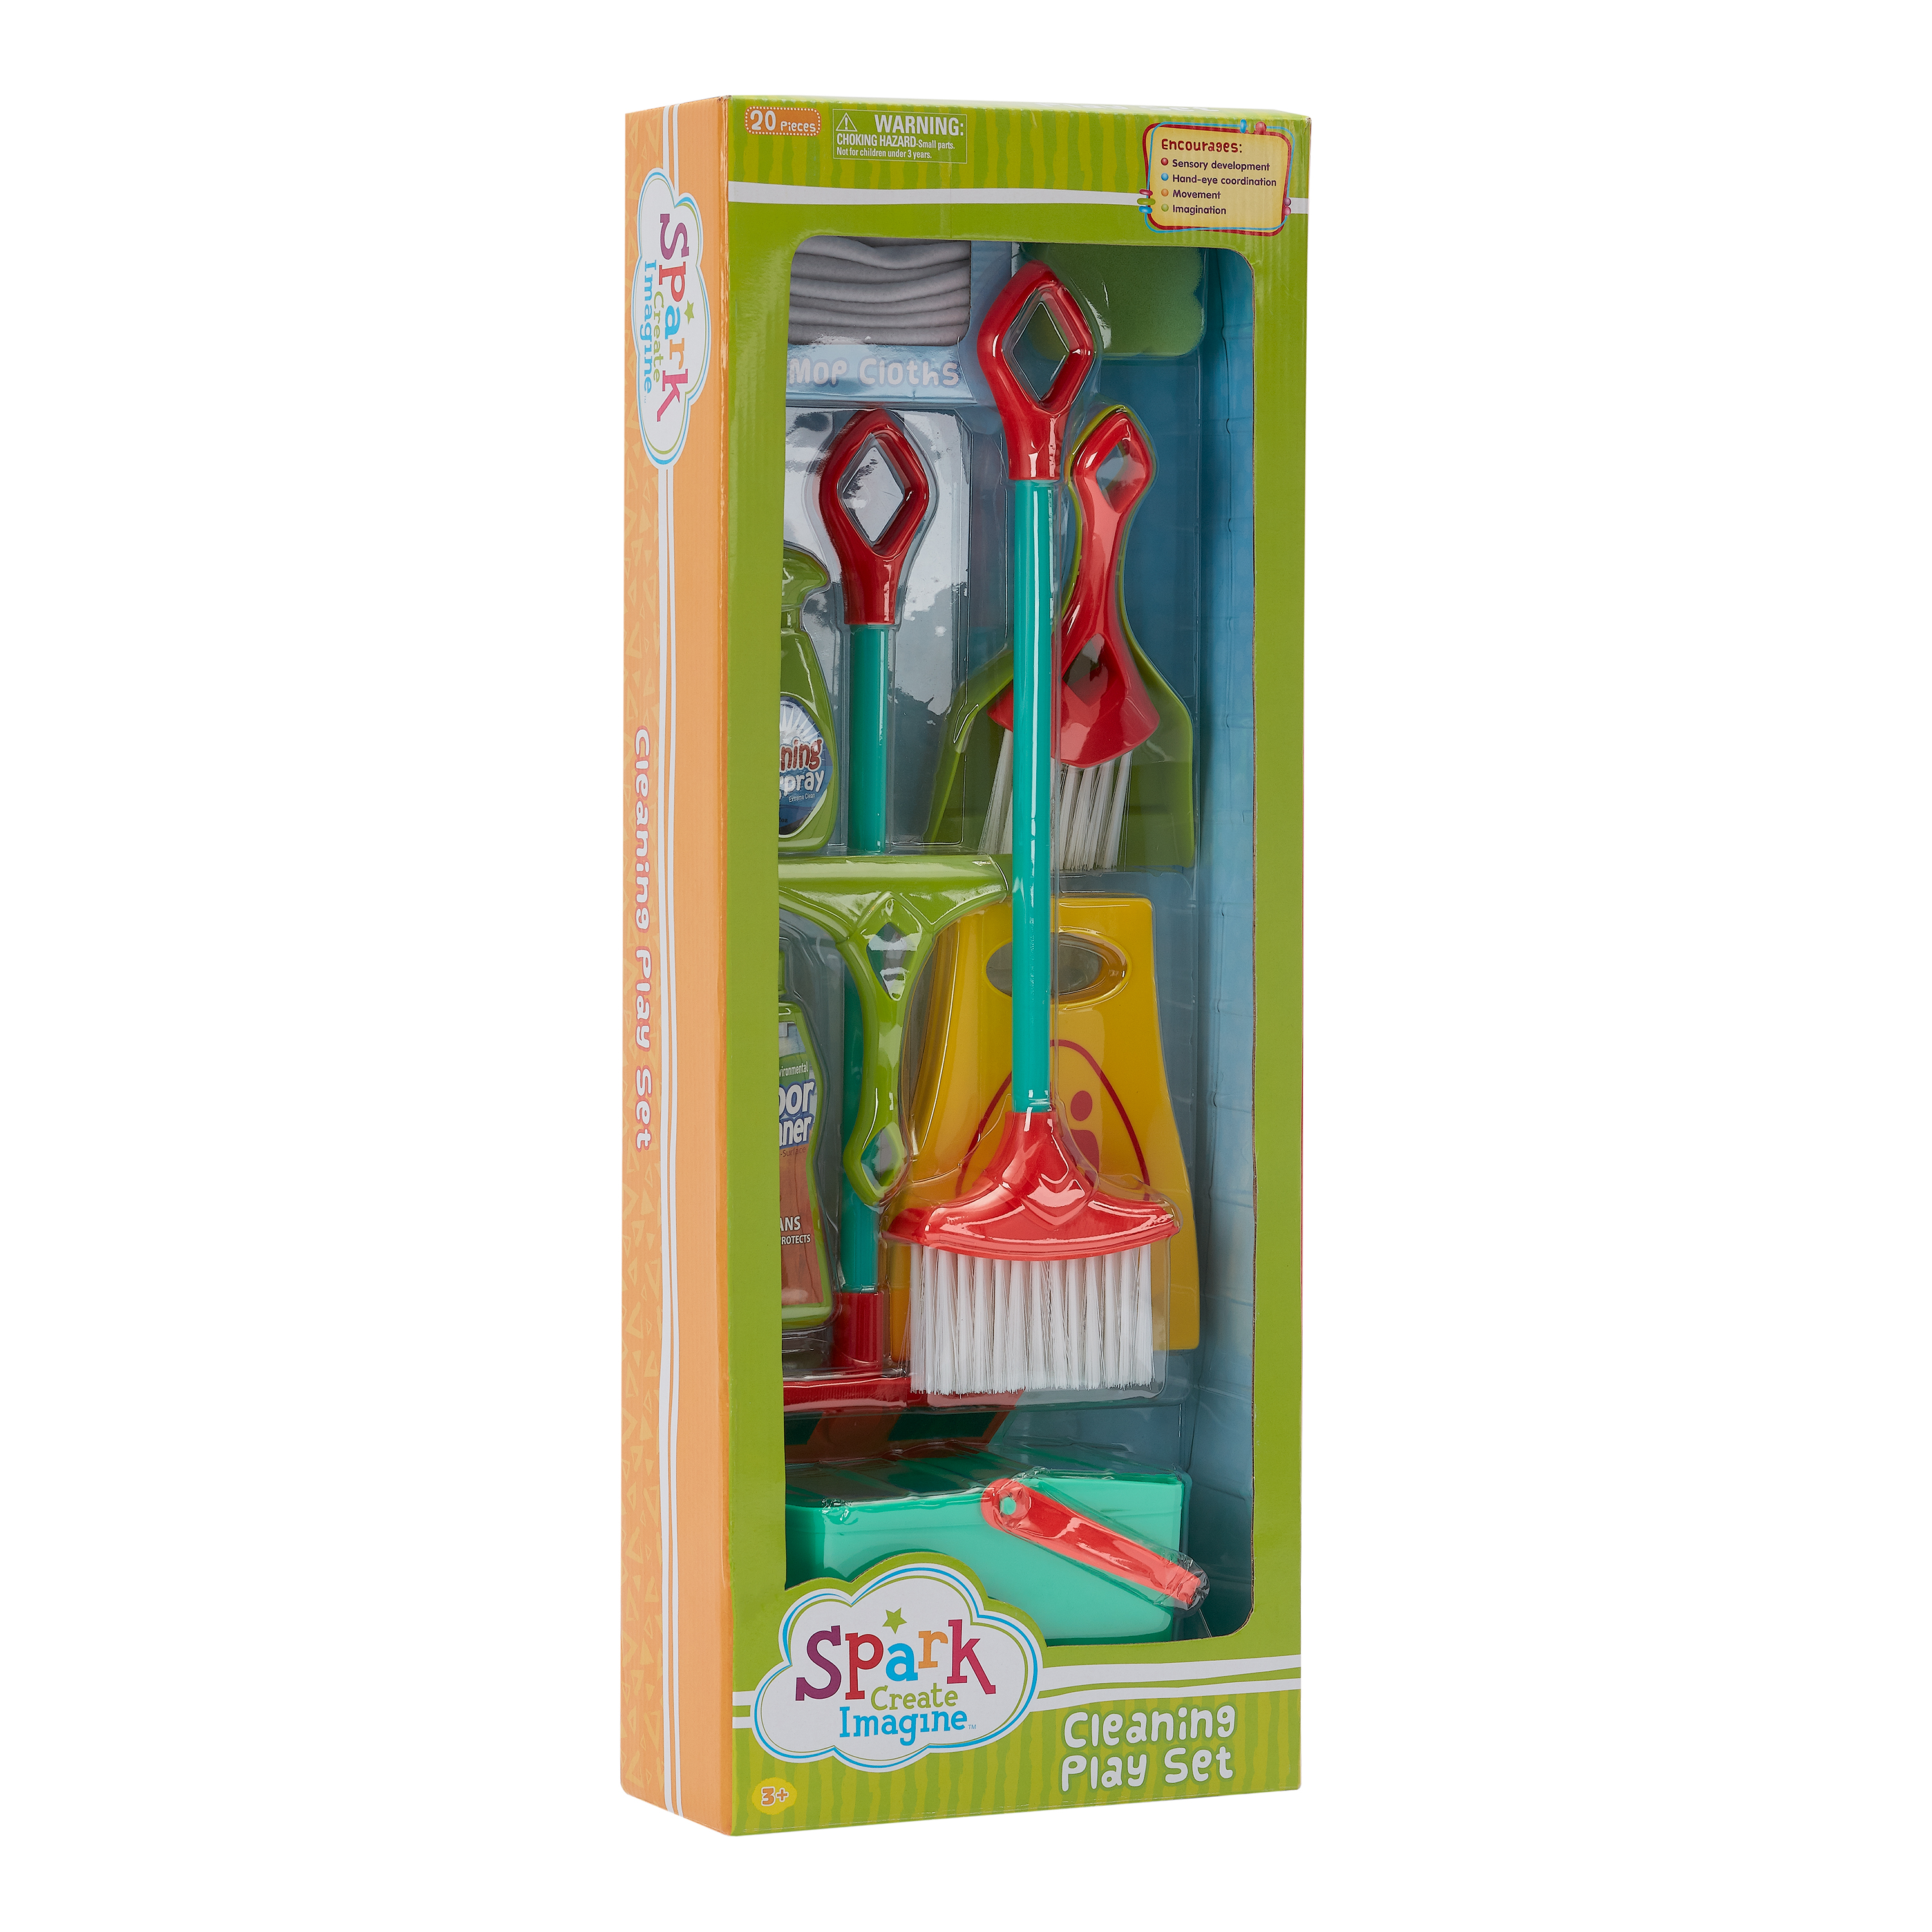 Spark. Create. Imagine. 20-Piece Cleaning Play Set - image 3 of 4